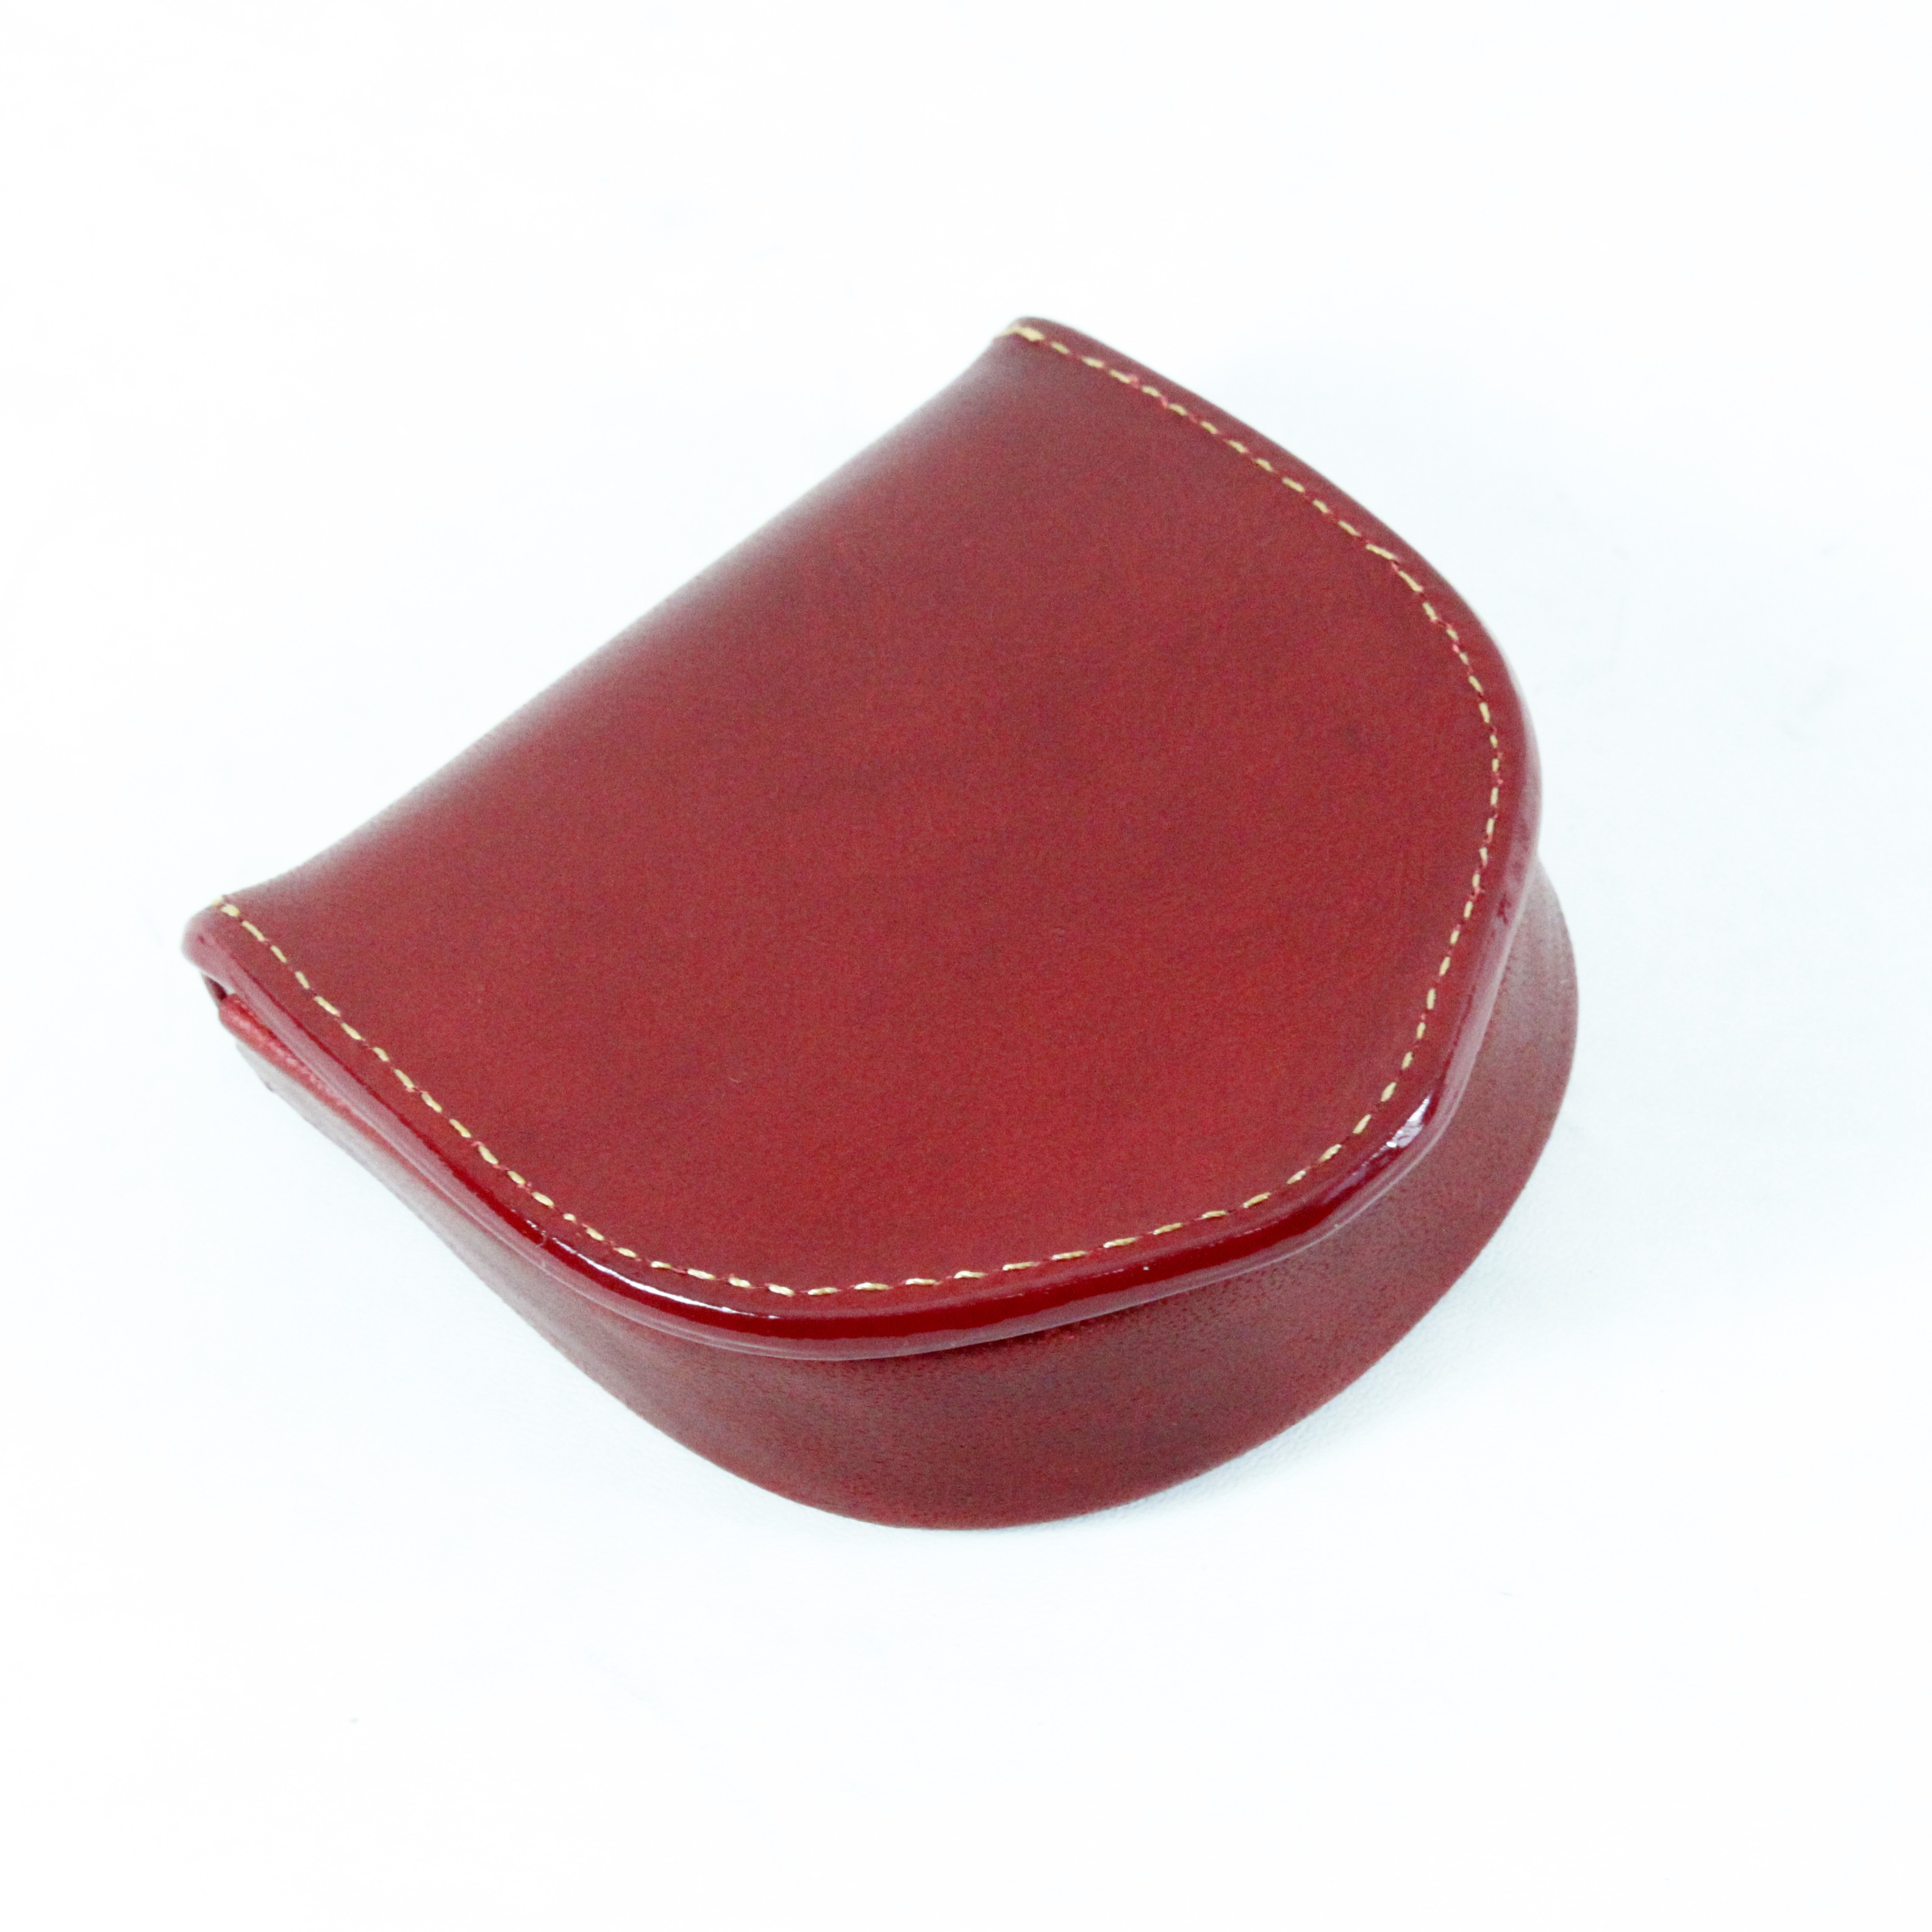 Small red leather bag | Rouje